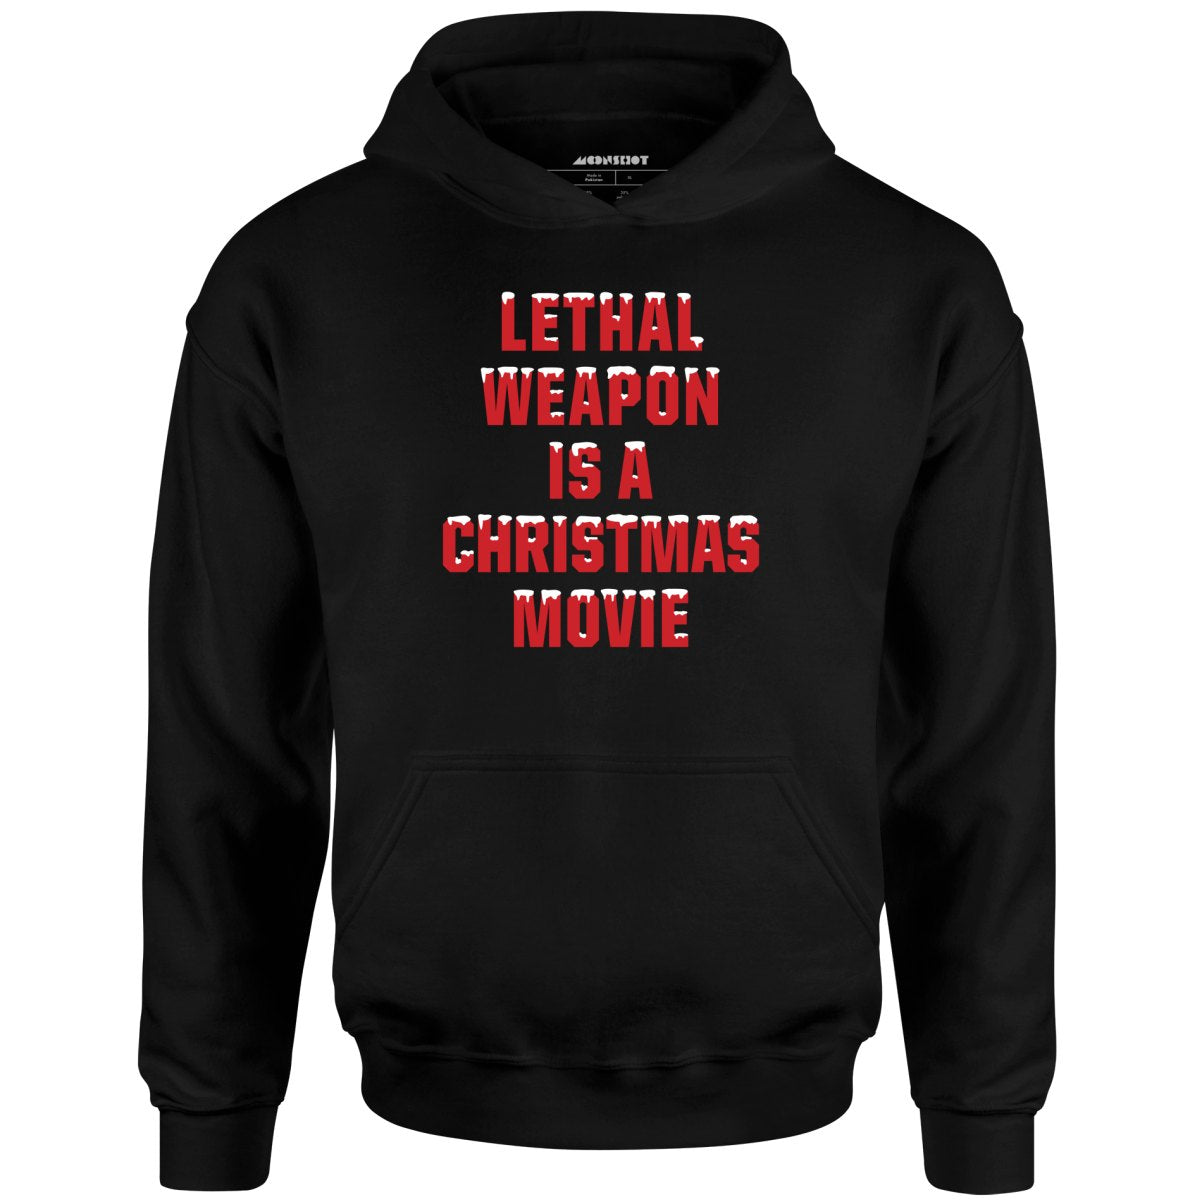 Lethal Weapon is a Christmas Movie - Unisex Hoodie